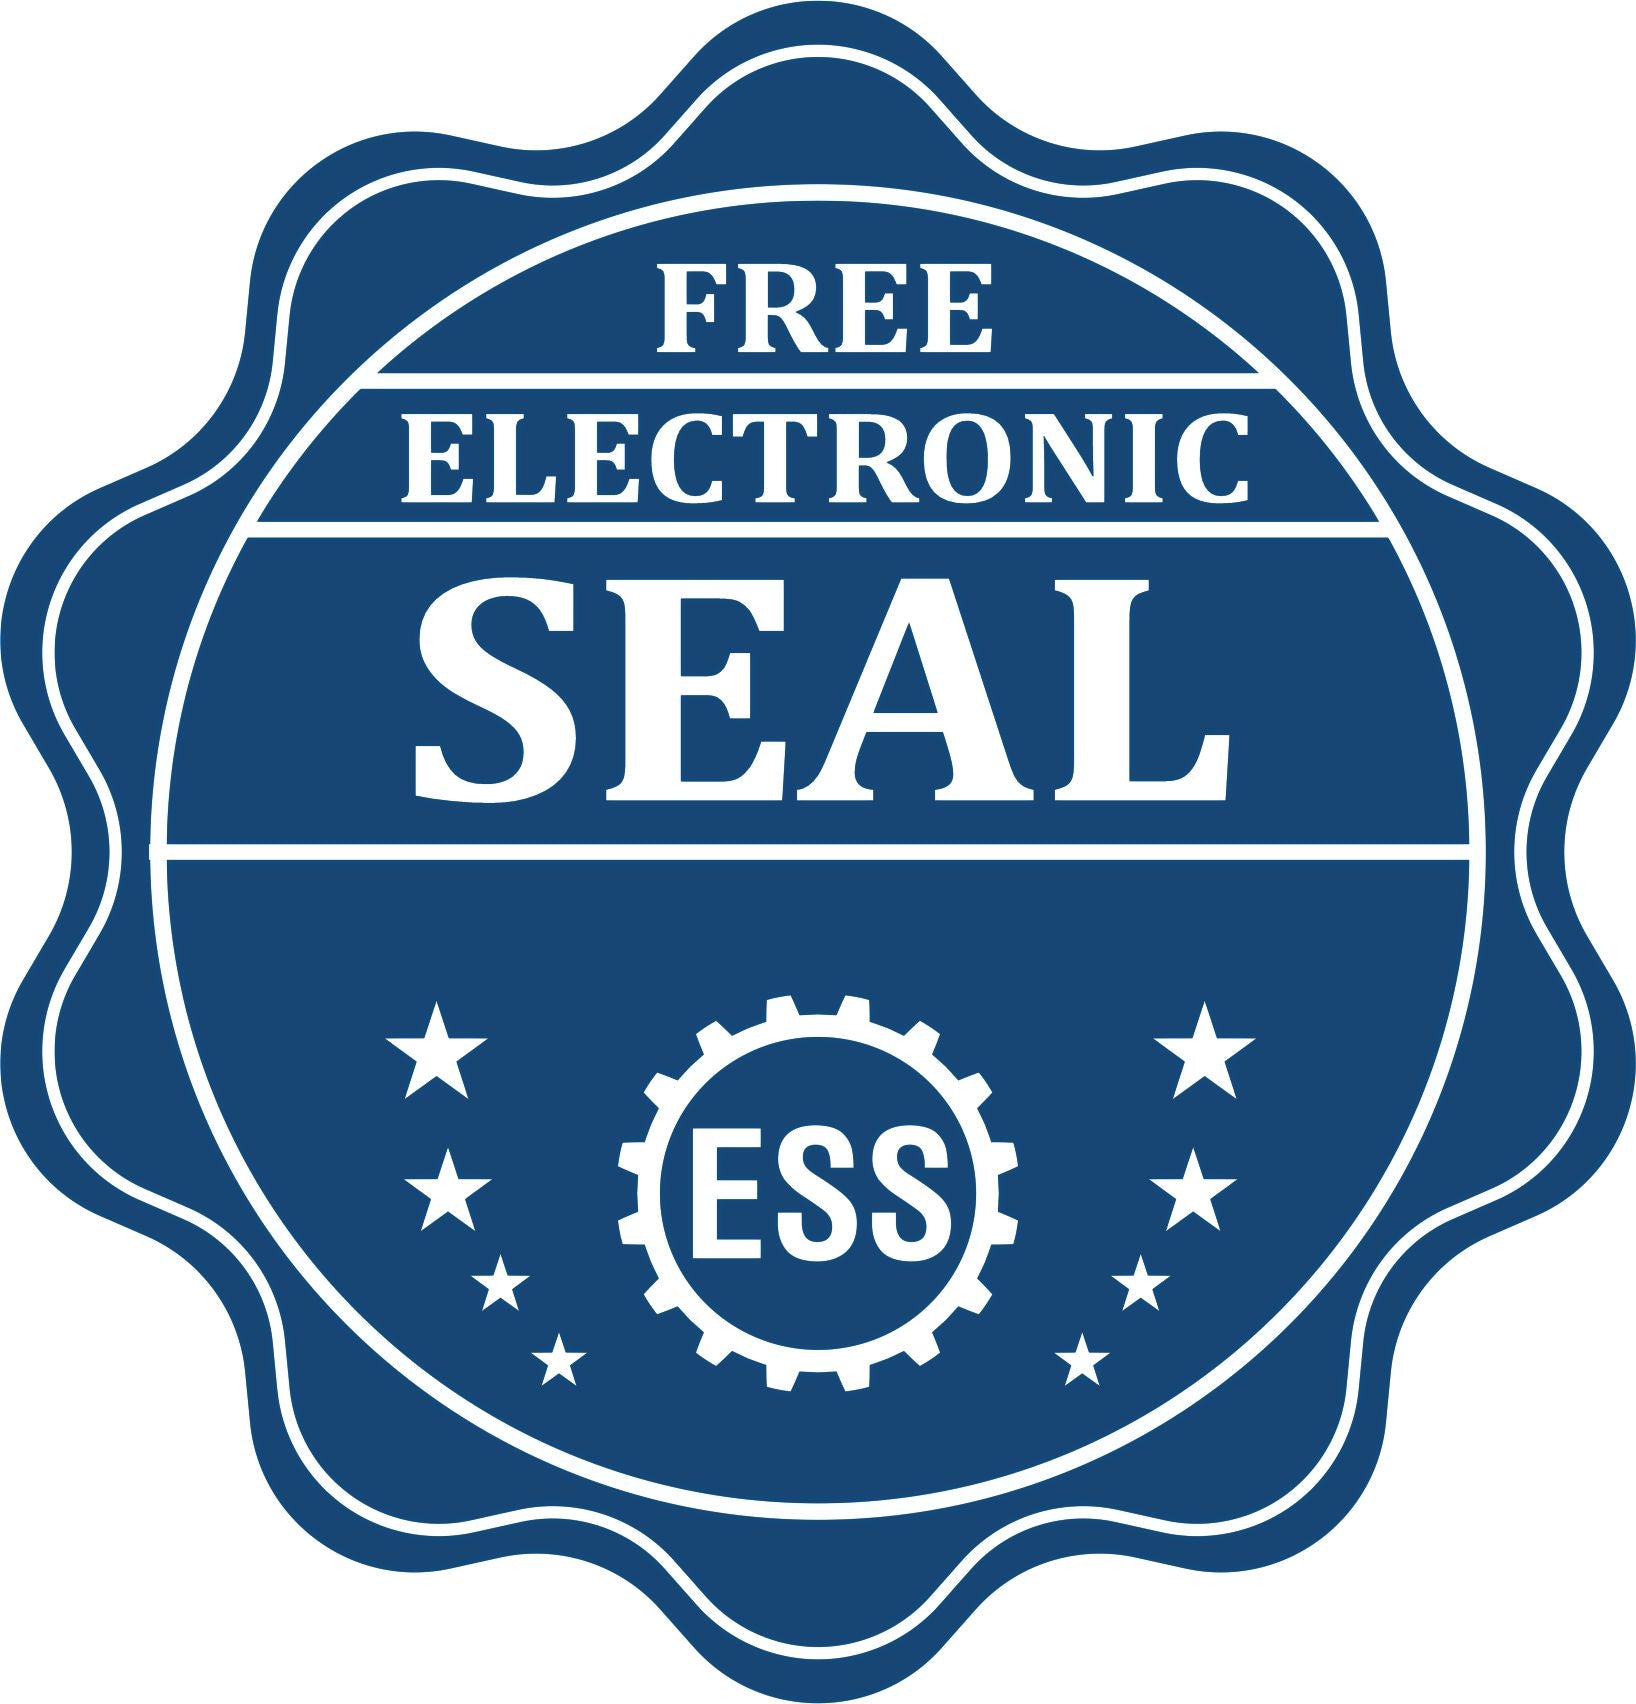 A badge showing a free electronic seal for the Slim Pre-Inked Illinois Professional Geologist Seal Stamp with stars and the ESS gear on the emblem.